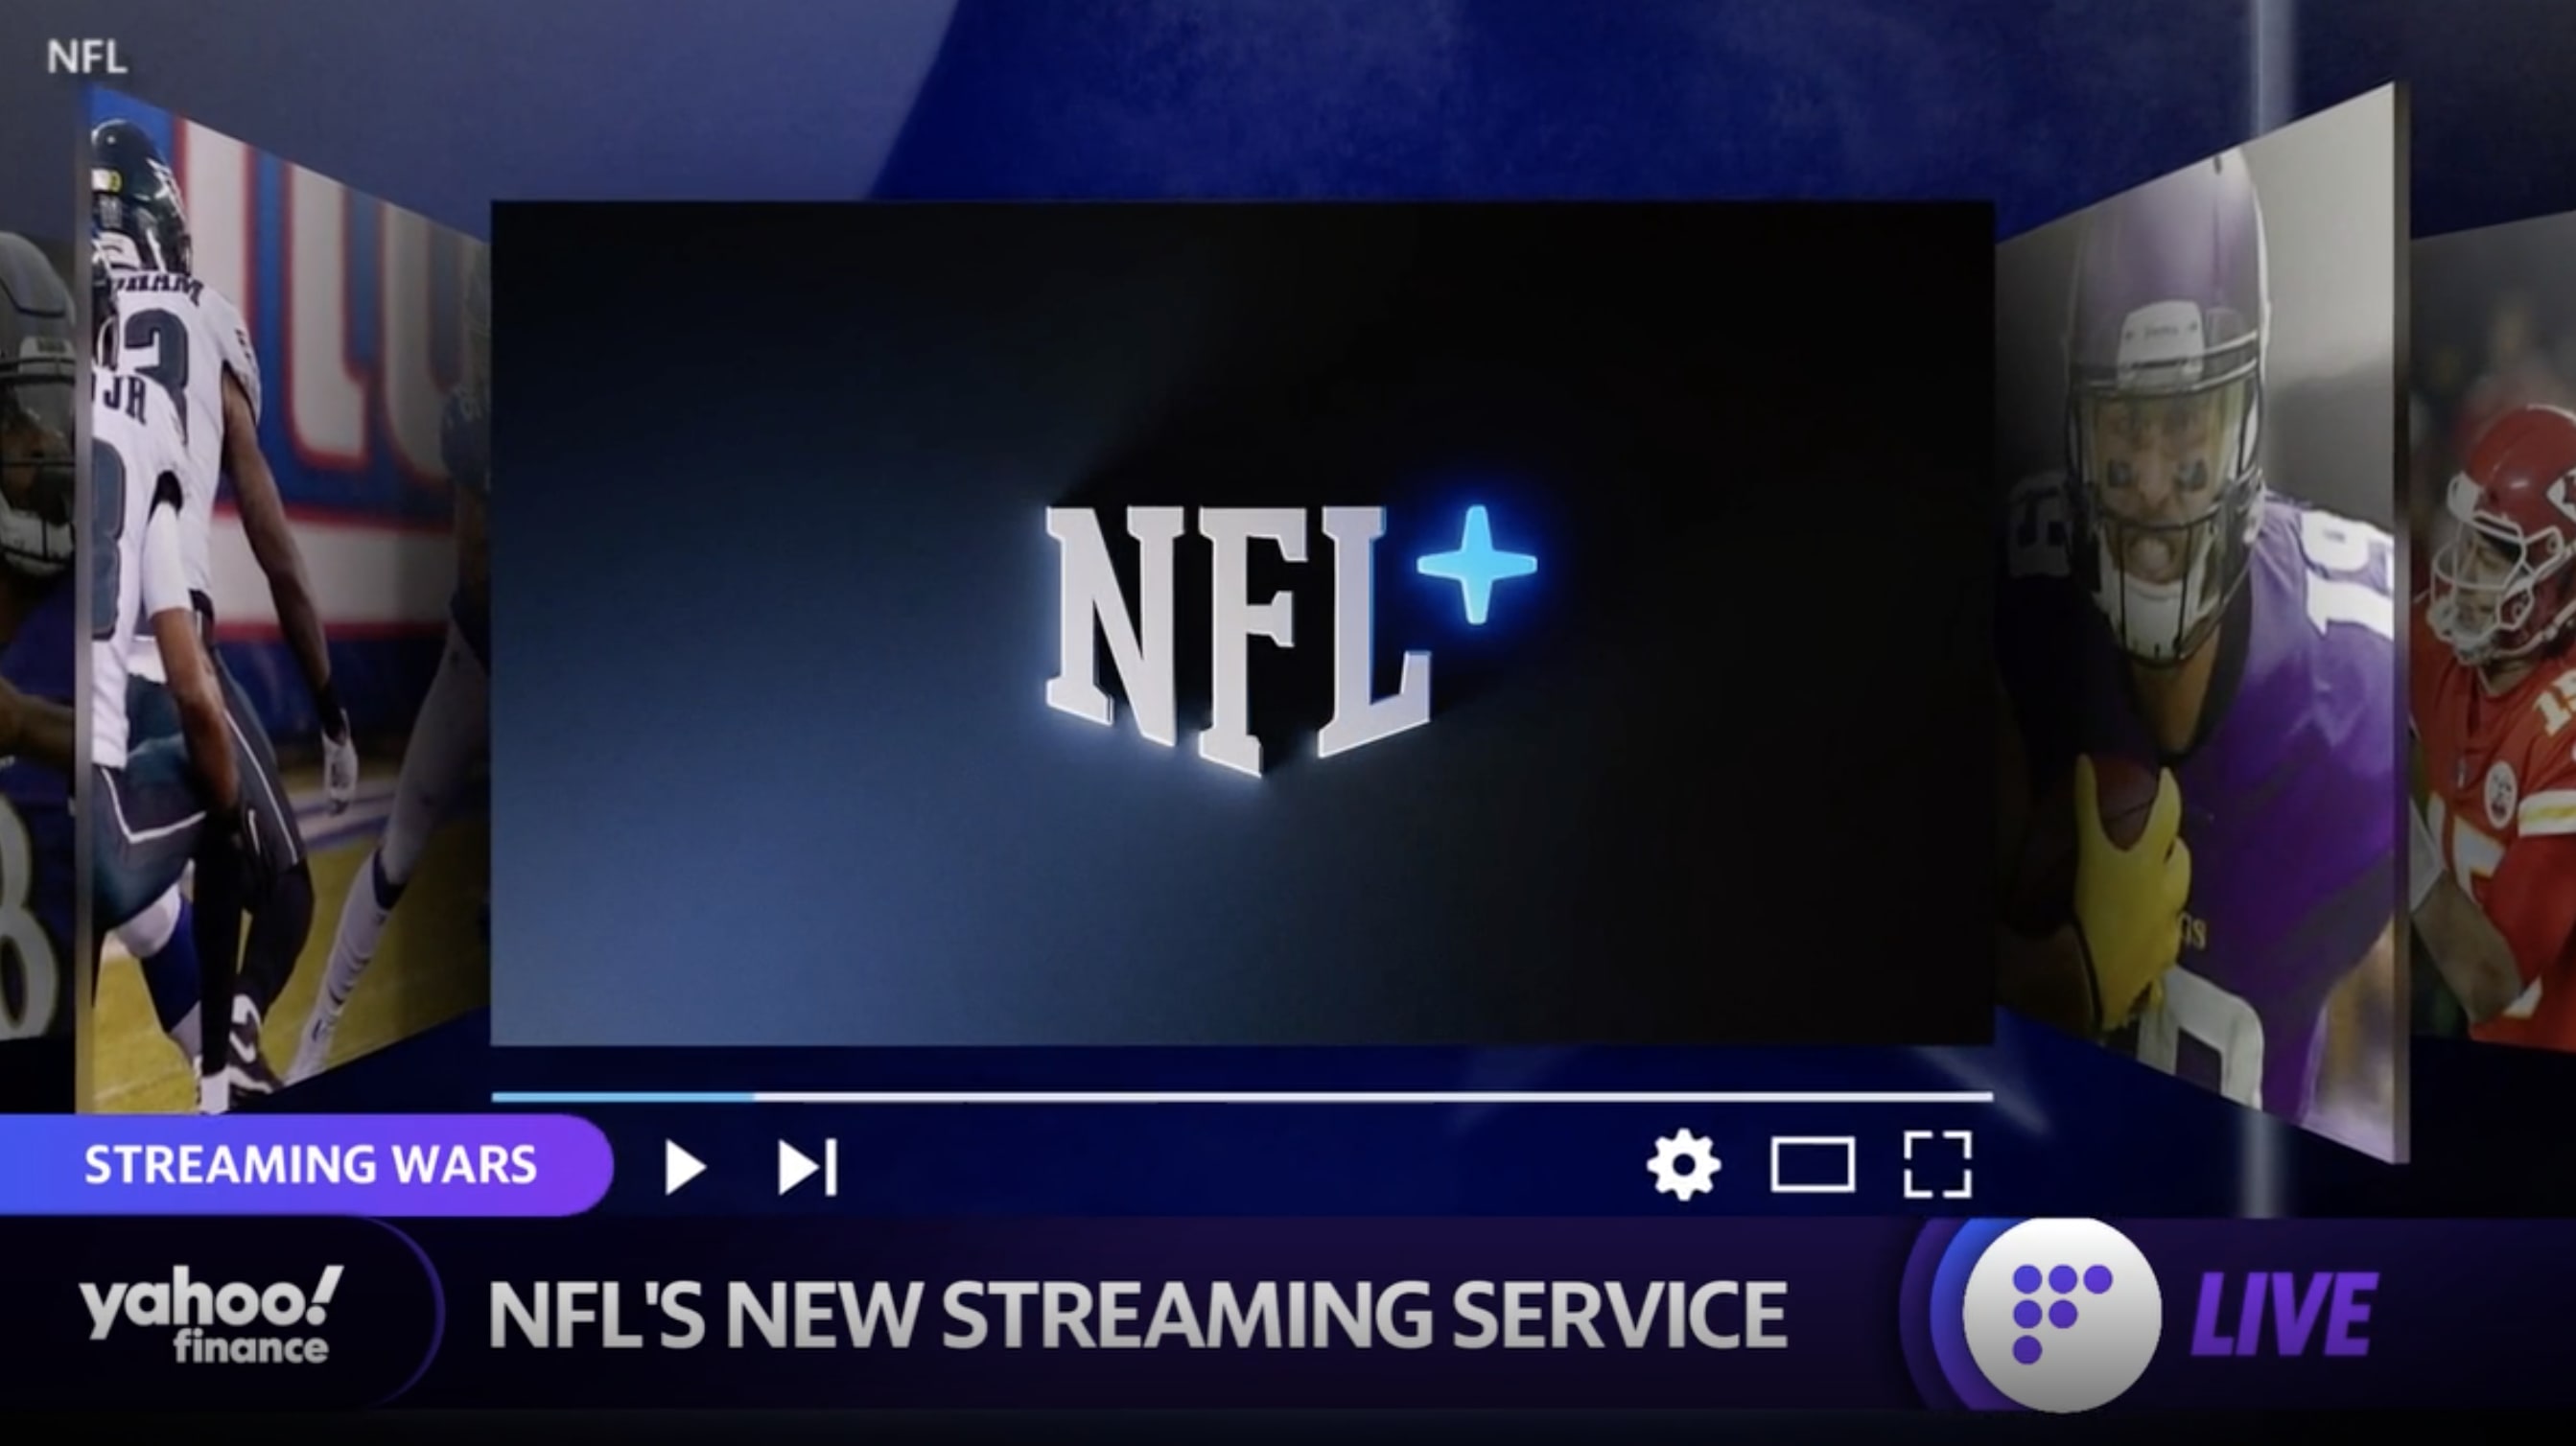 NFL Plus streaming has live games for $4.99 per month — but not on your TV  - The Verge